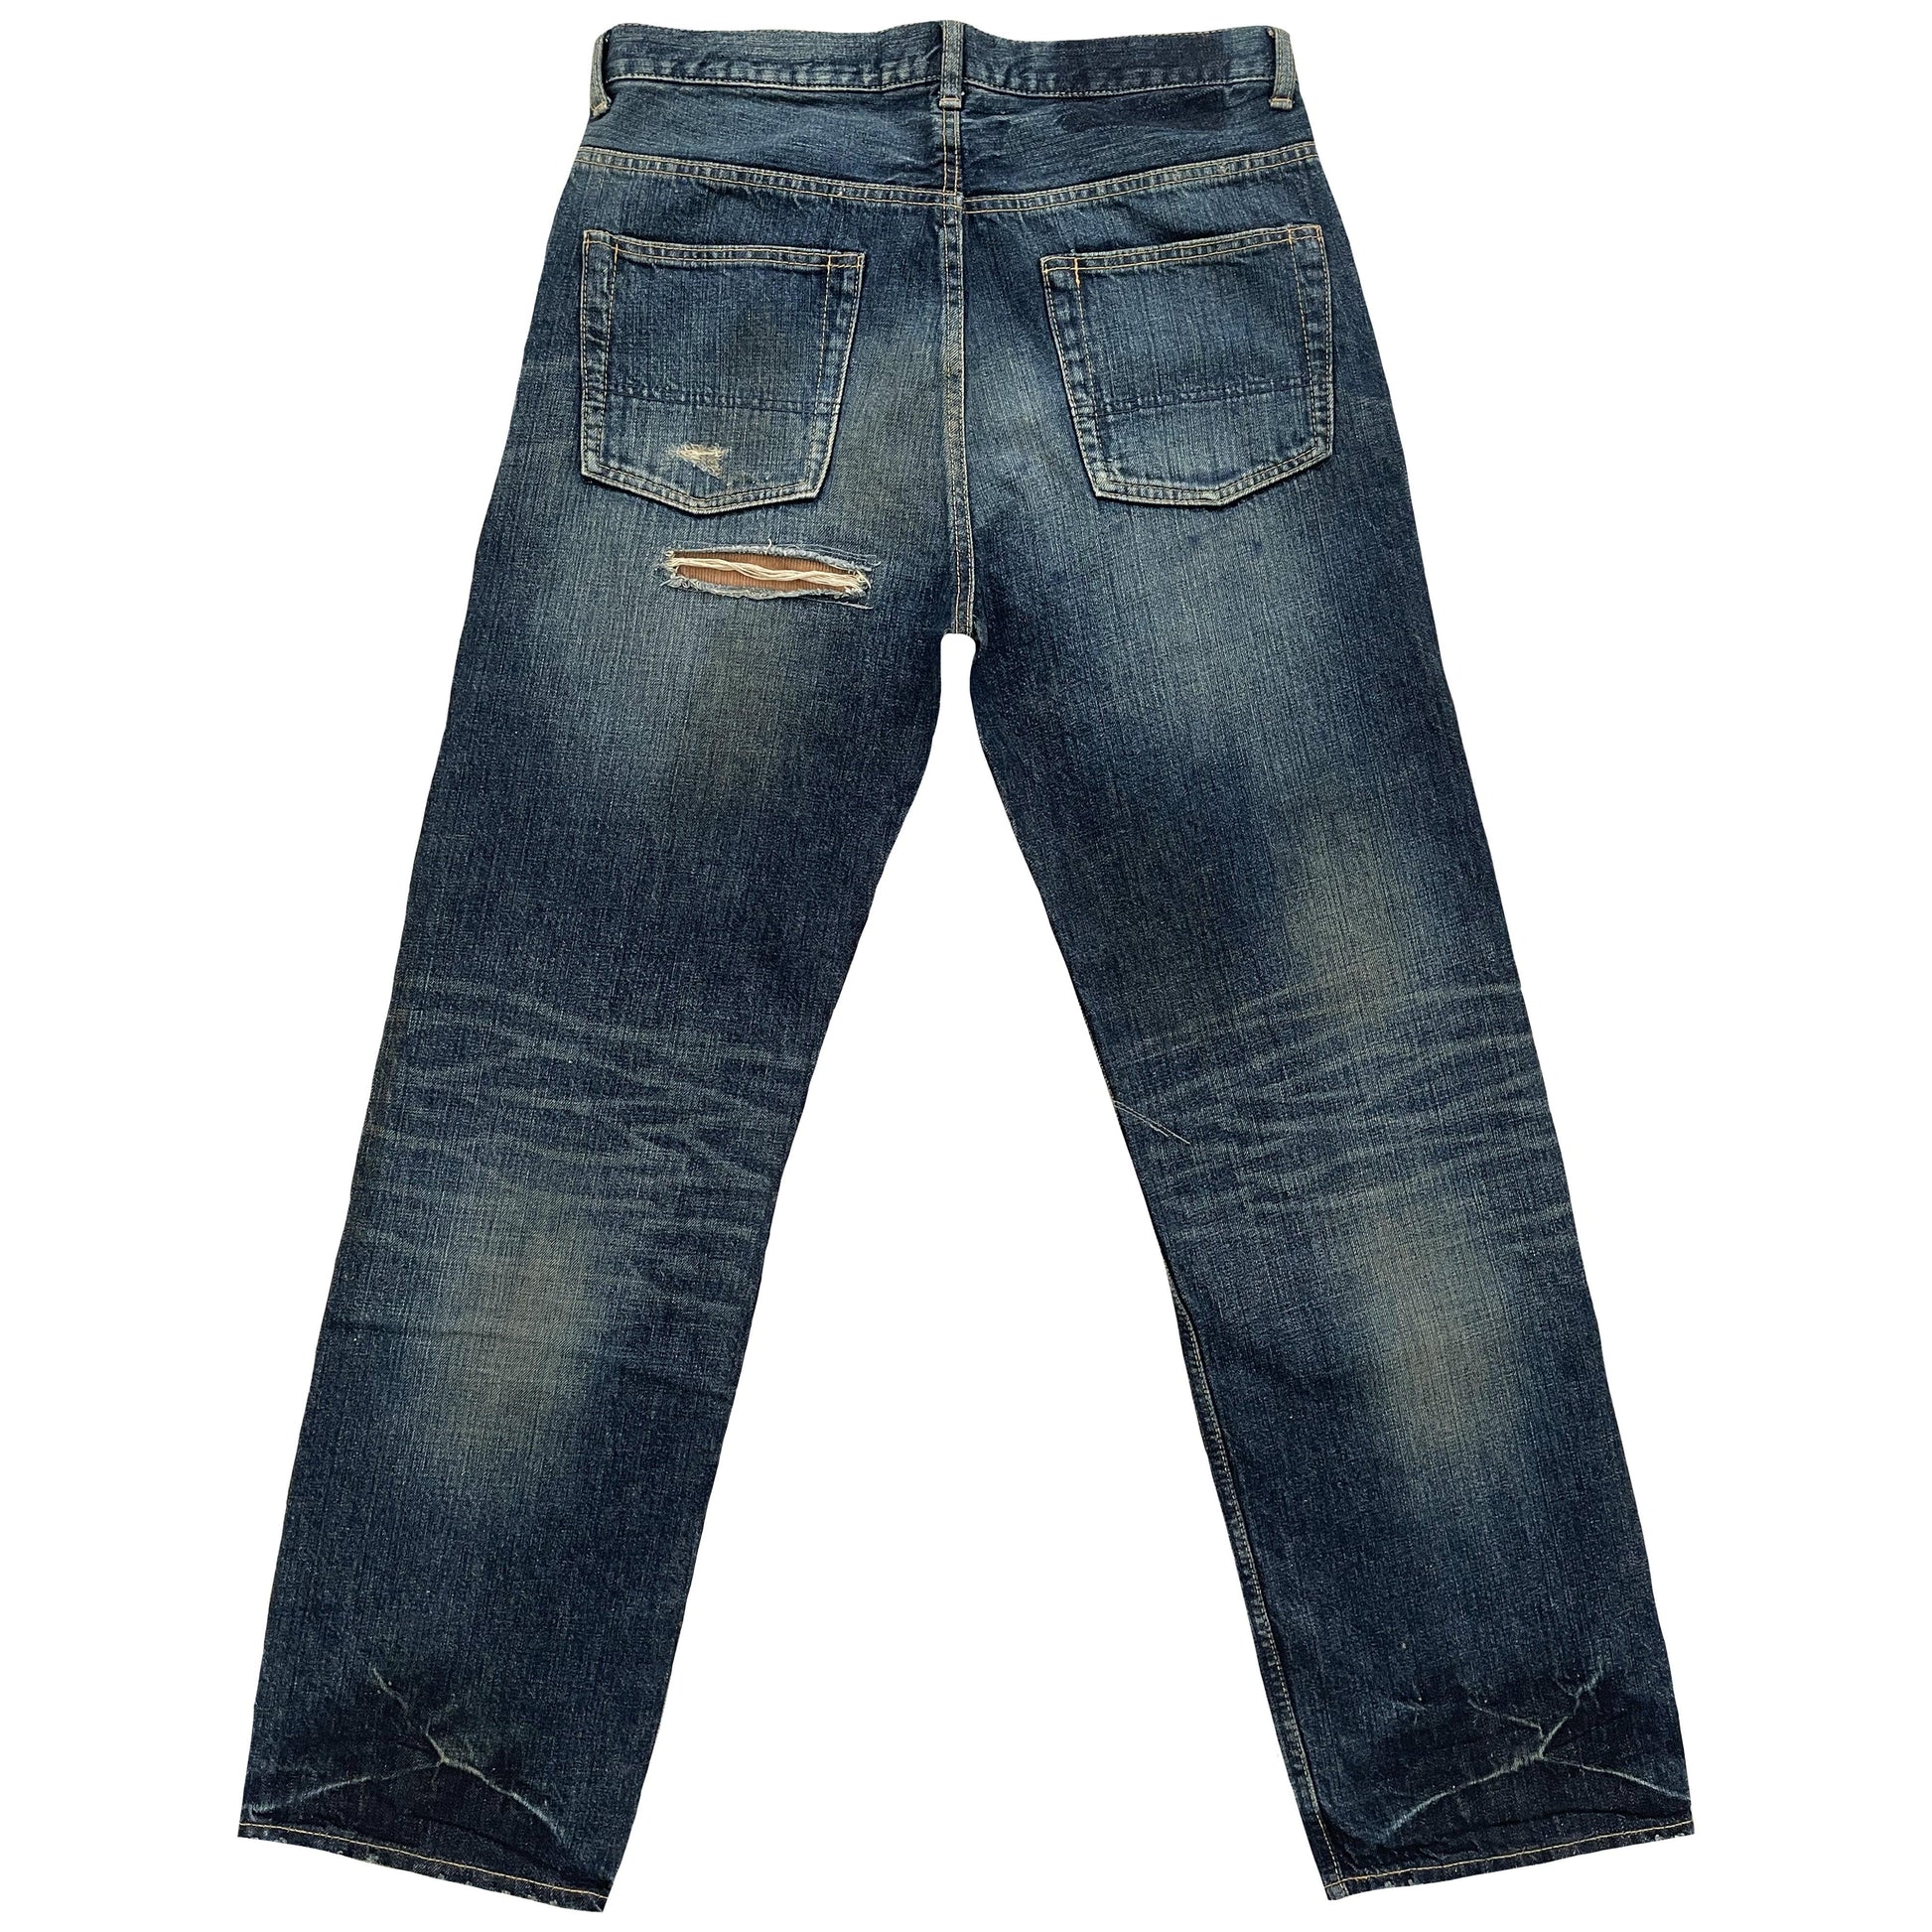 Japanese Muddy Boro Jeans - Known Source